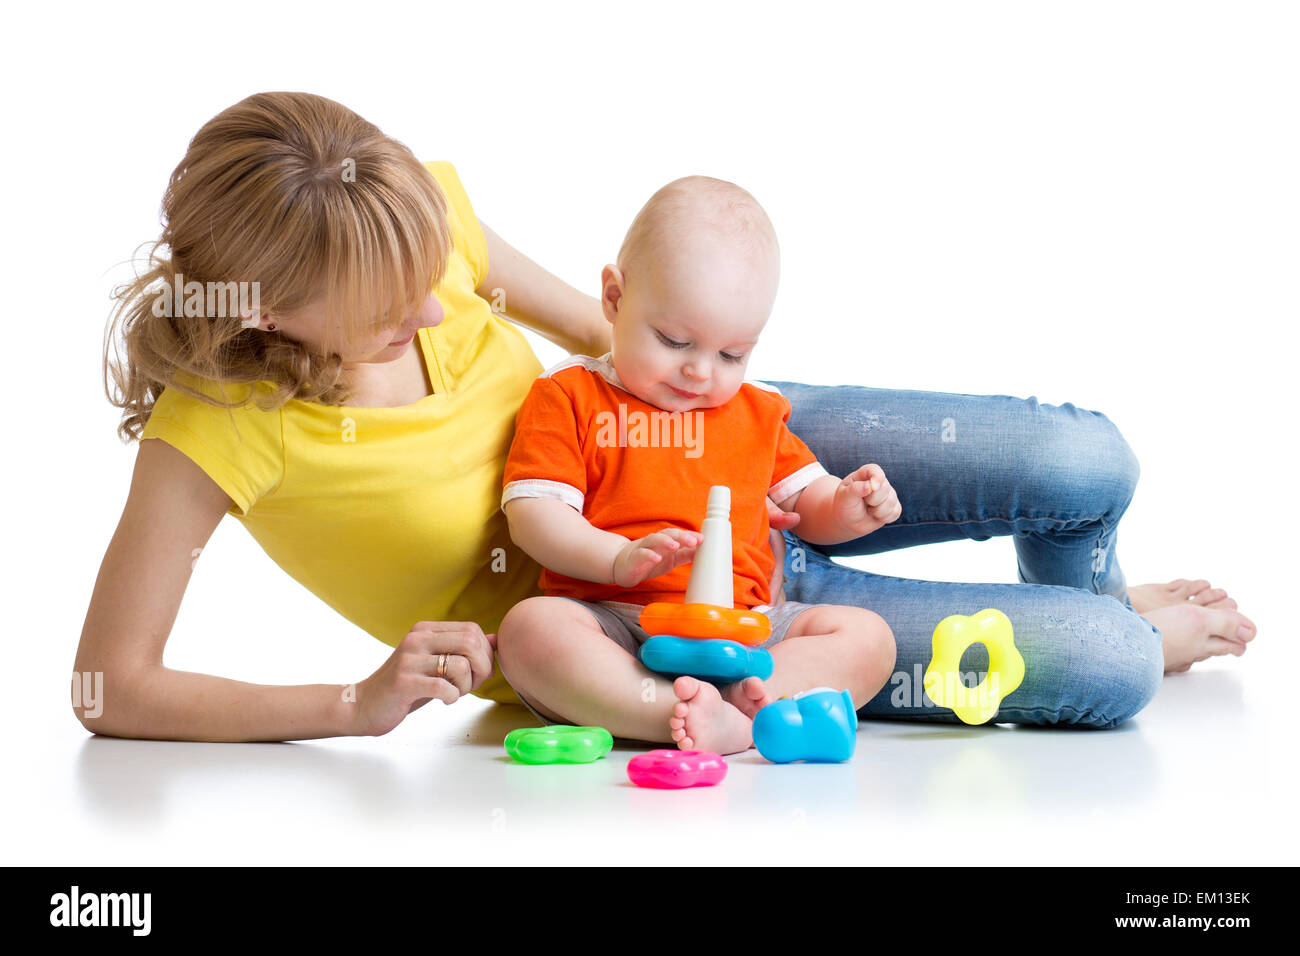 kid boy and mother play together with pyramid toy Stock Photo